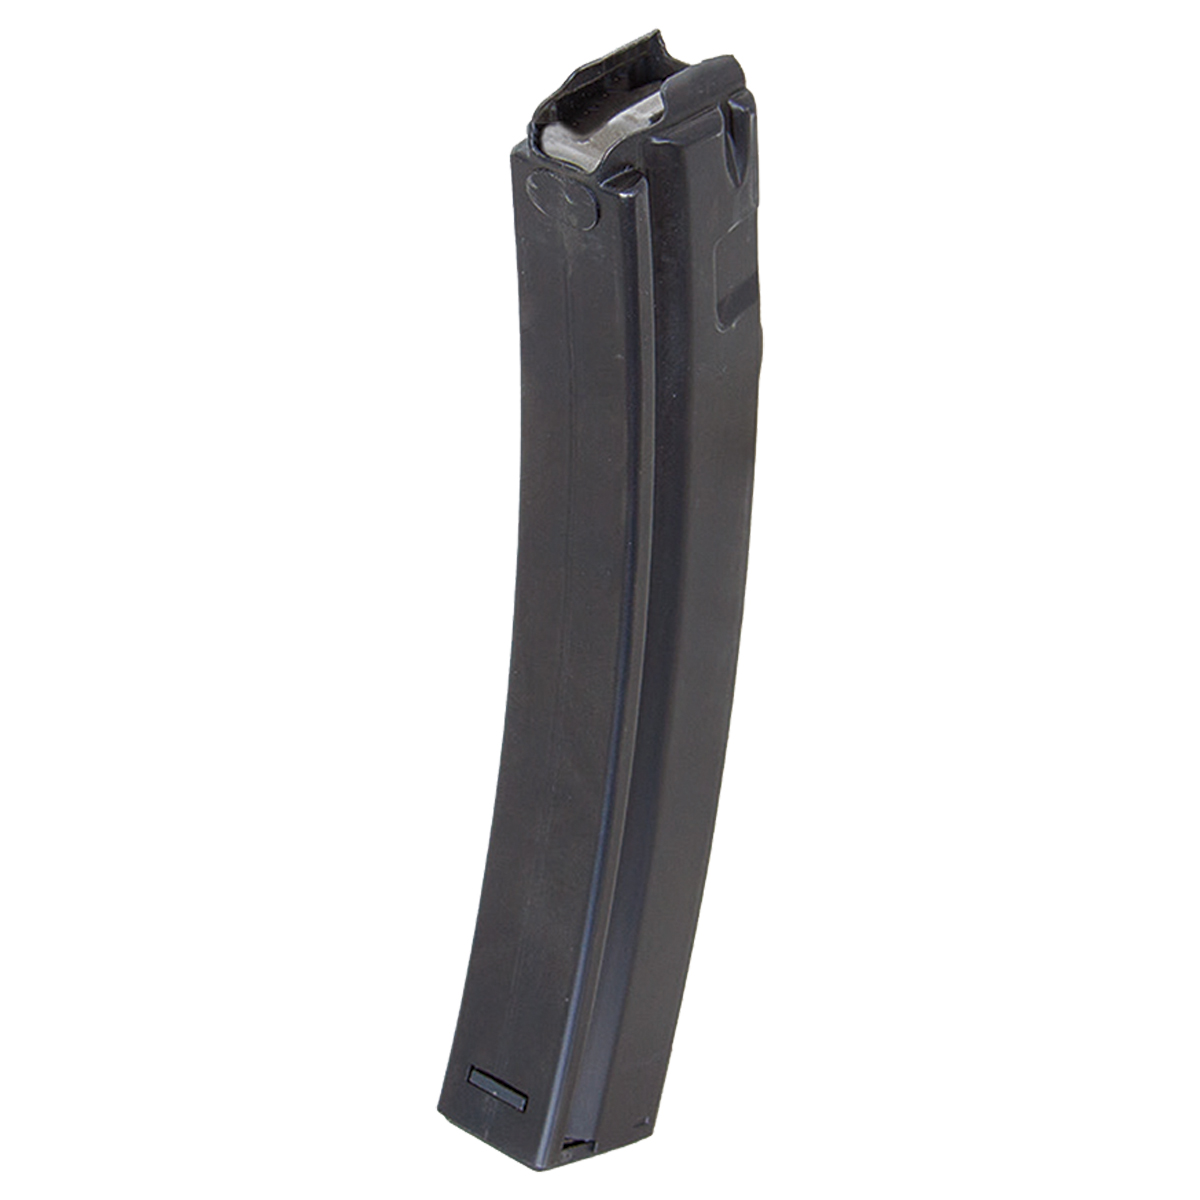 This replacement magazine fits the HK SP5K or other MP5 pattern firearms an...